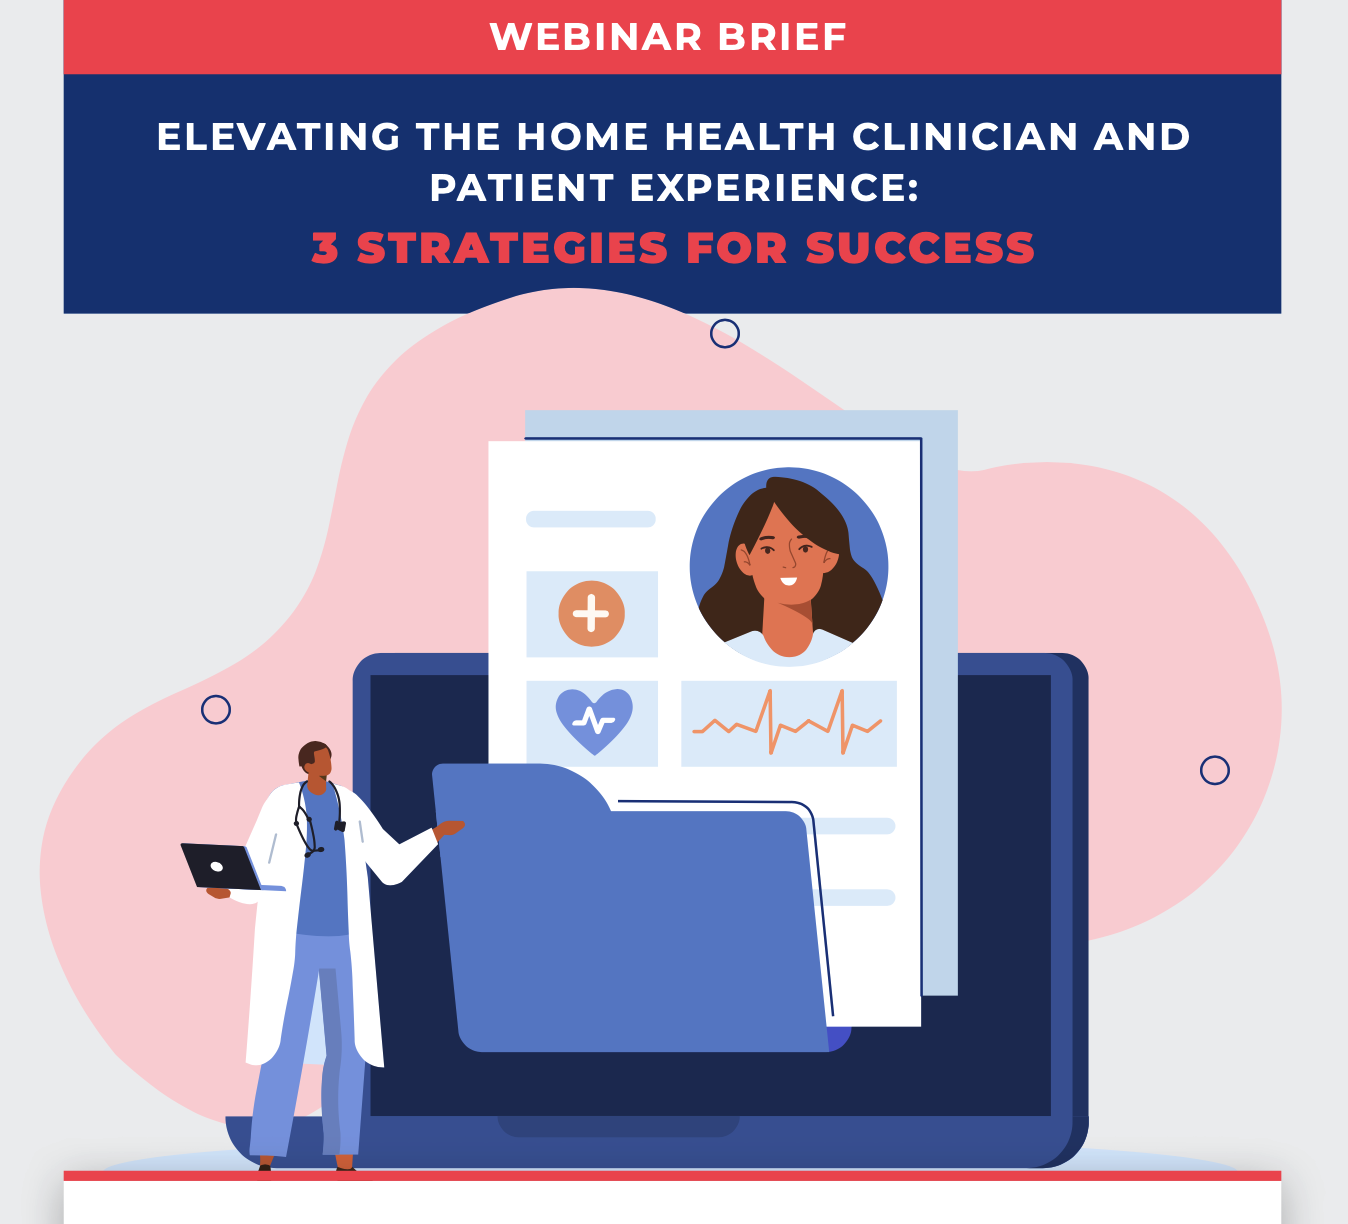 Download- Elevating the Home Health Clinician and Patient Experience: 3 Strategies for Success